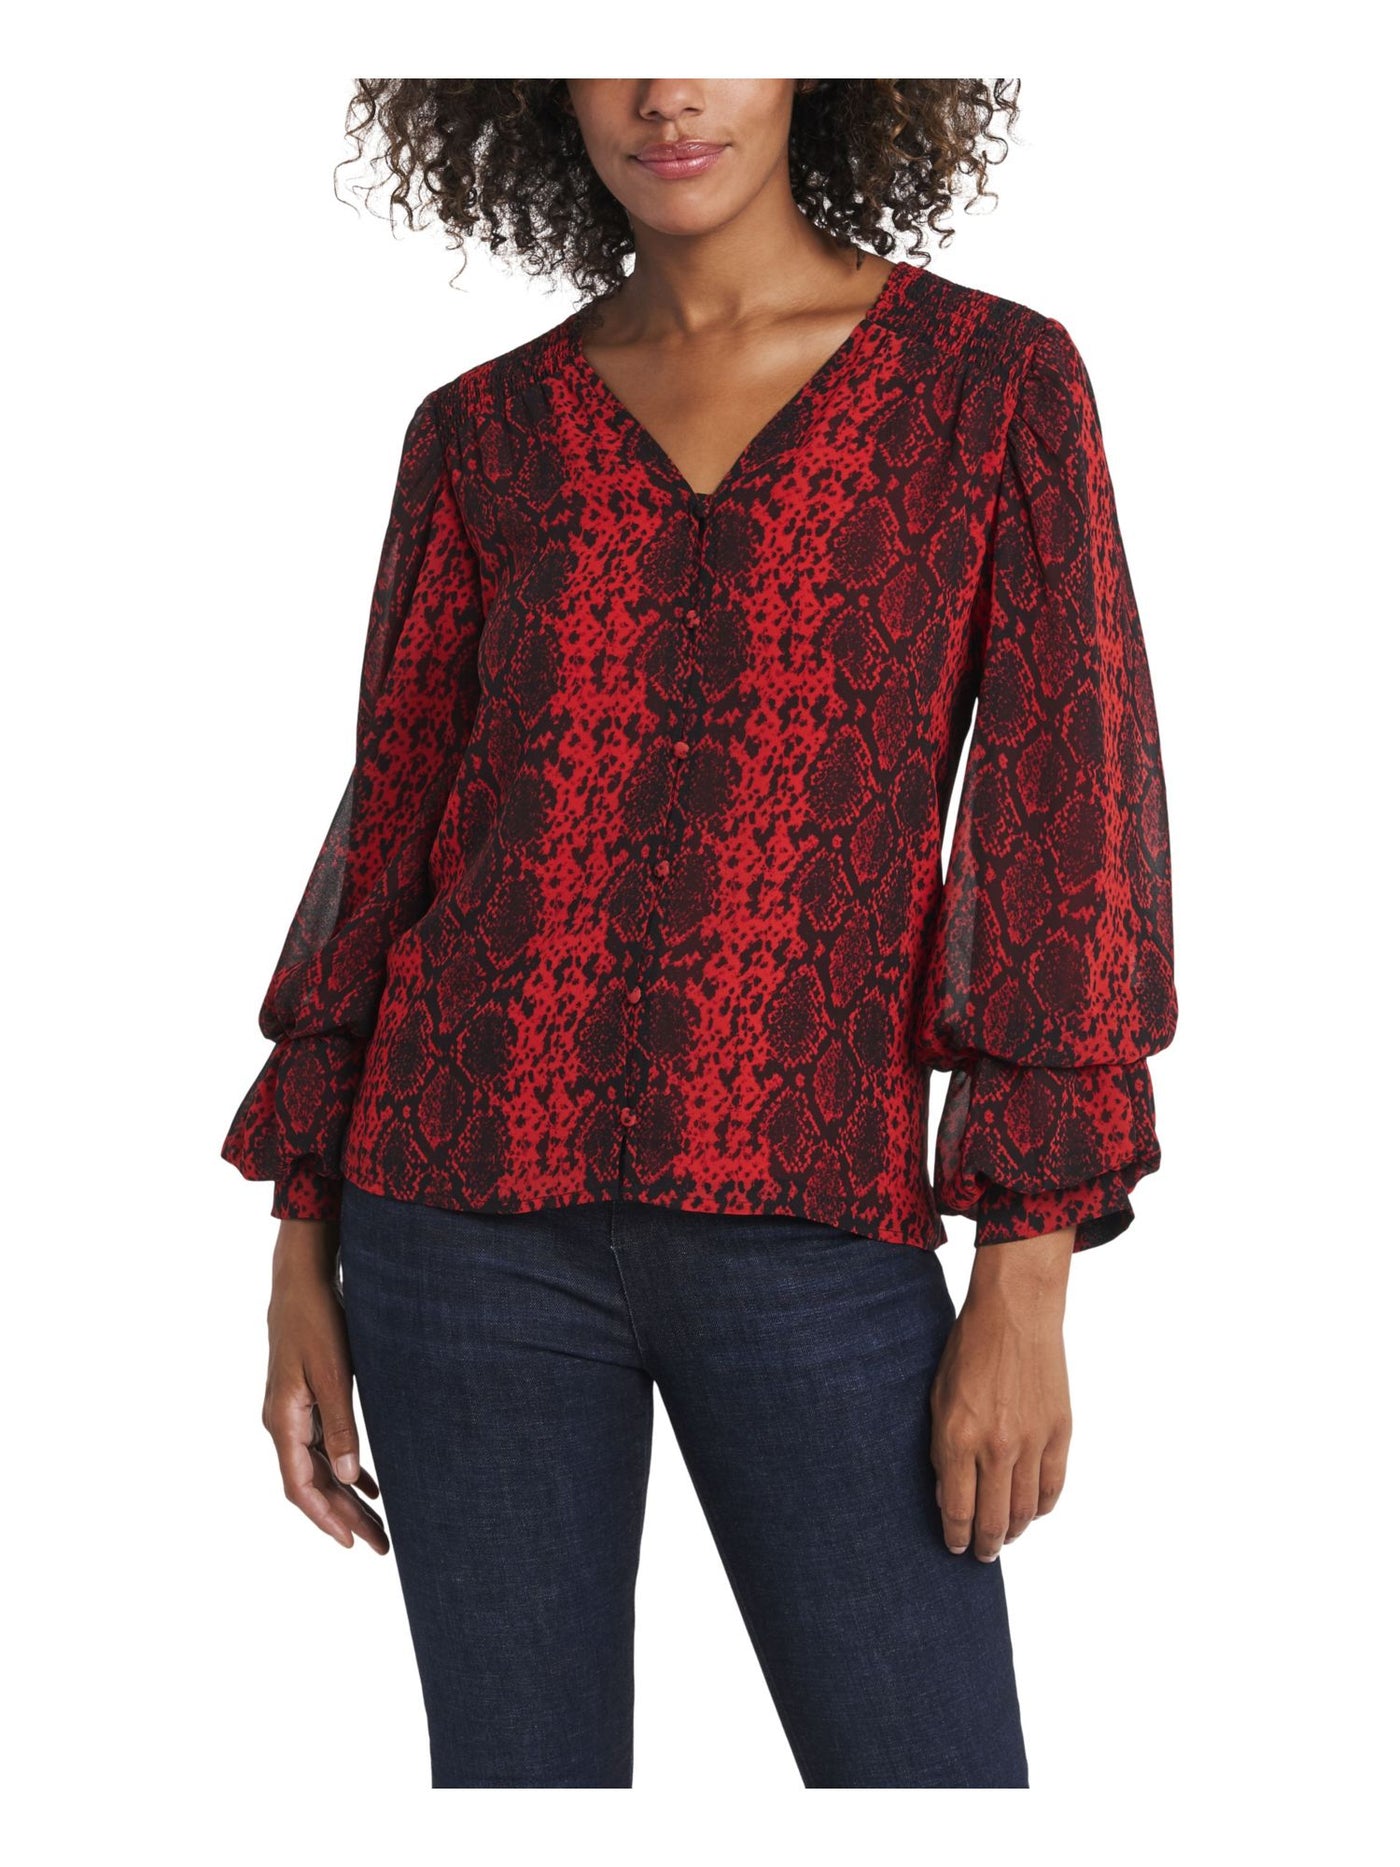 VINCE CAMUTO Womens Red Smocked Lined Vented Hems Animal Print Balloon Sleeve V Neck Wear To Work Button Up Top L